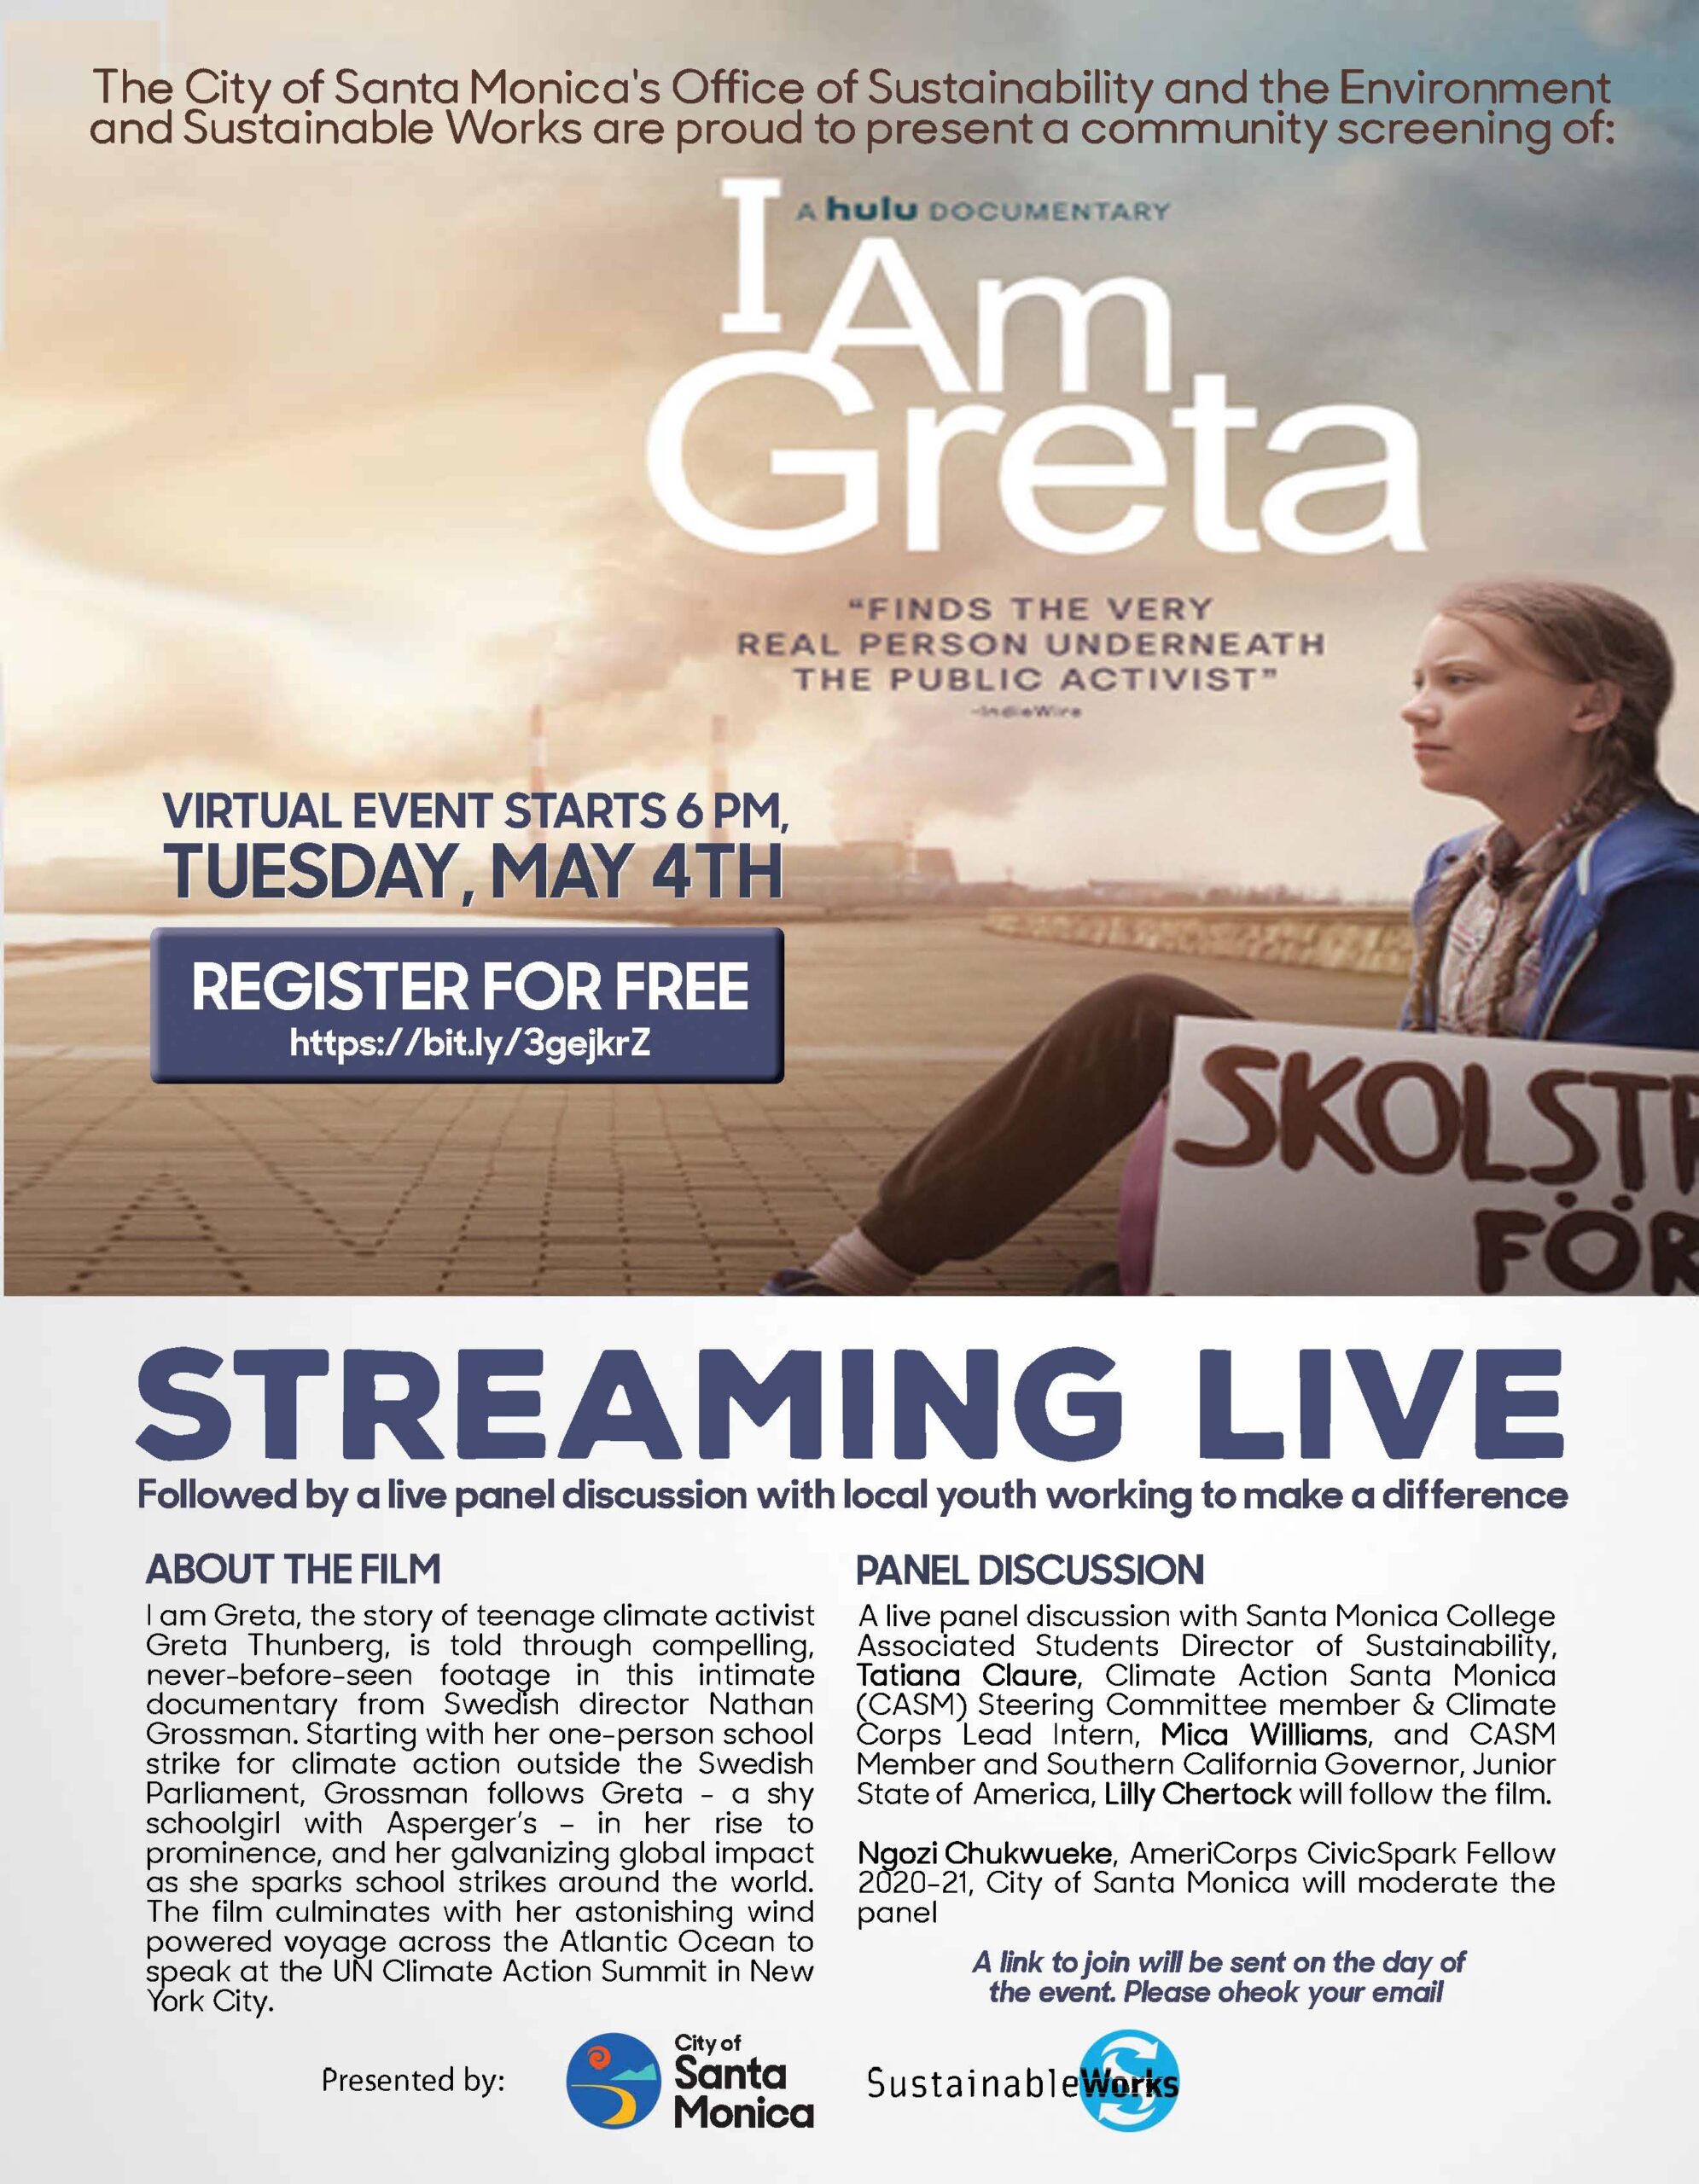 I Am Greta Online Screening and Panel Discussion